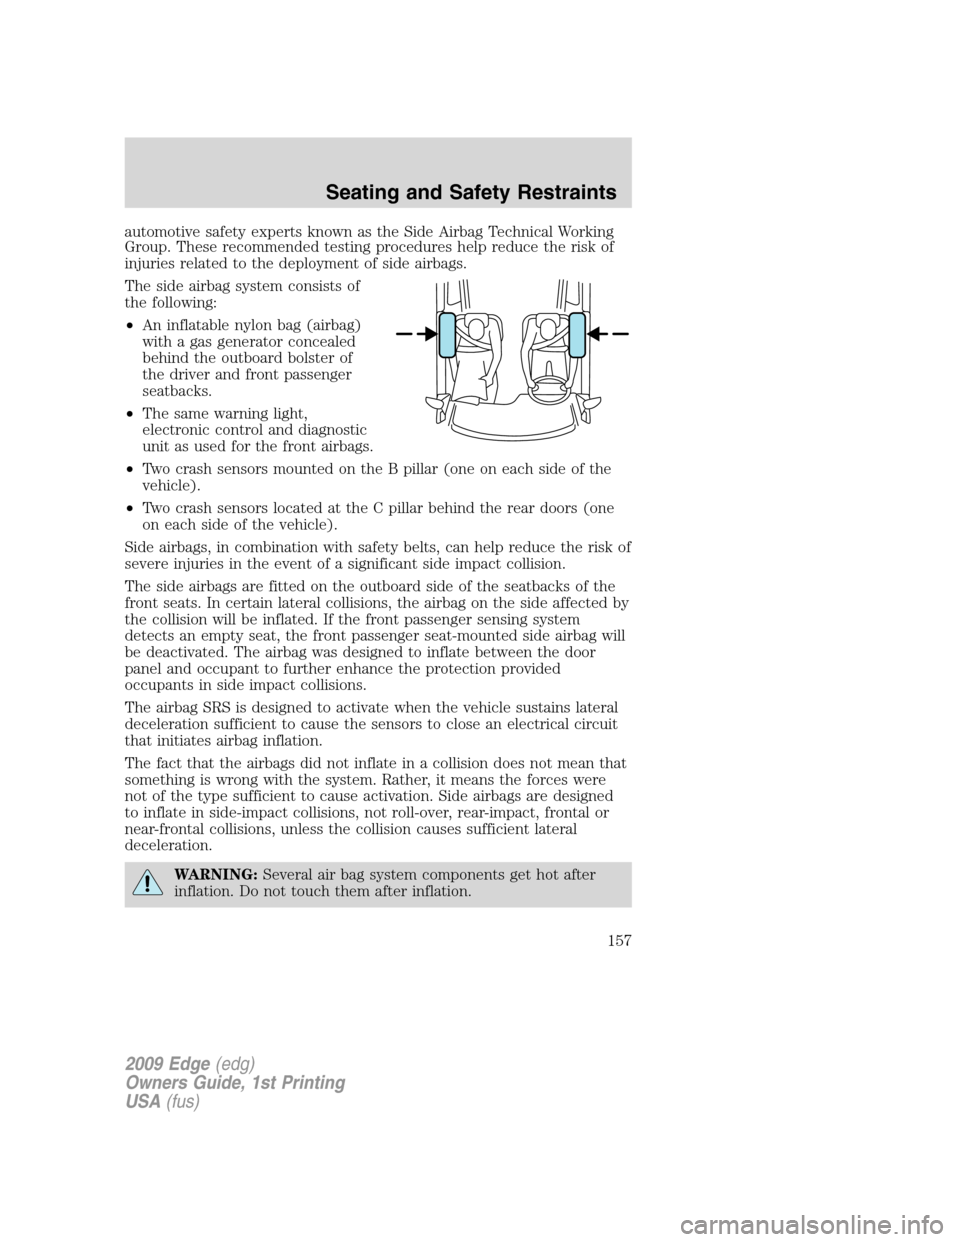 FORD EDGE 2009 1.G Owners Manual automotive safety experts known as the Side Airbag Technical Working
Group. These recommended testing procedures help reduce the risk of
injuries related to the deployment of side airbags.
The side ai